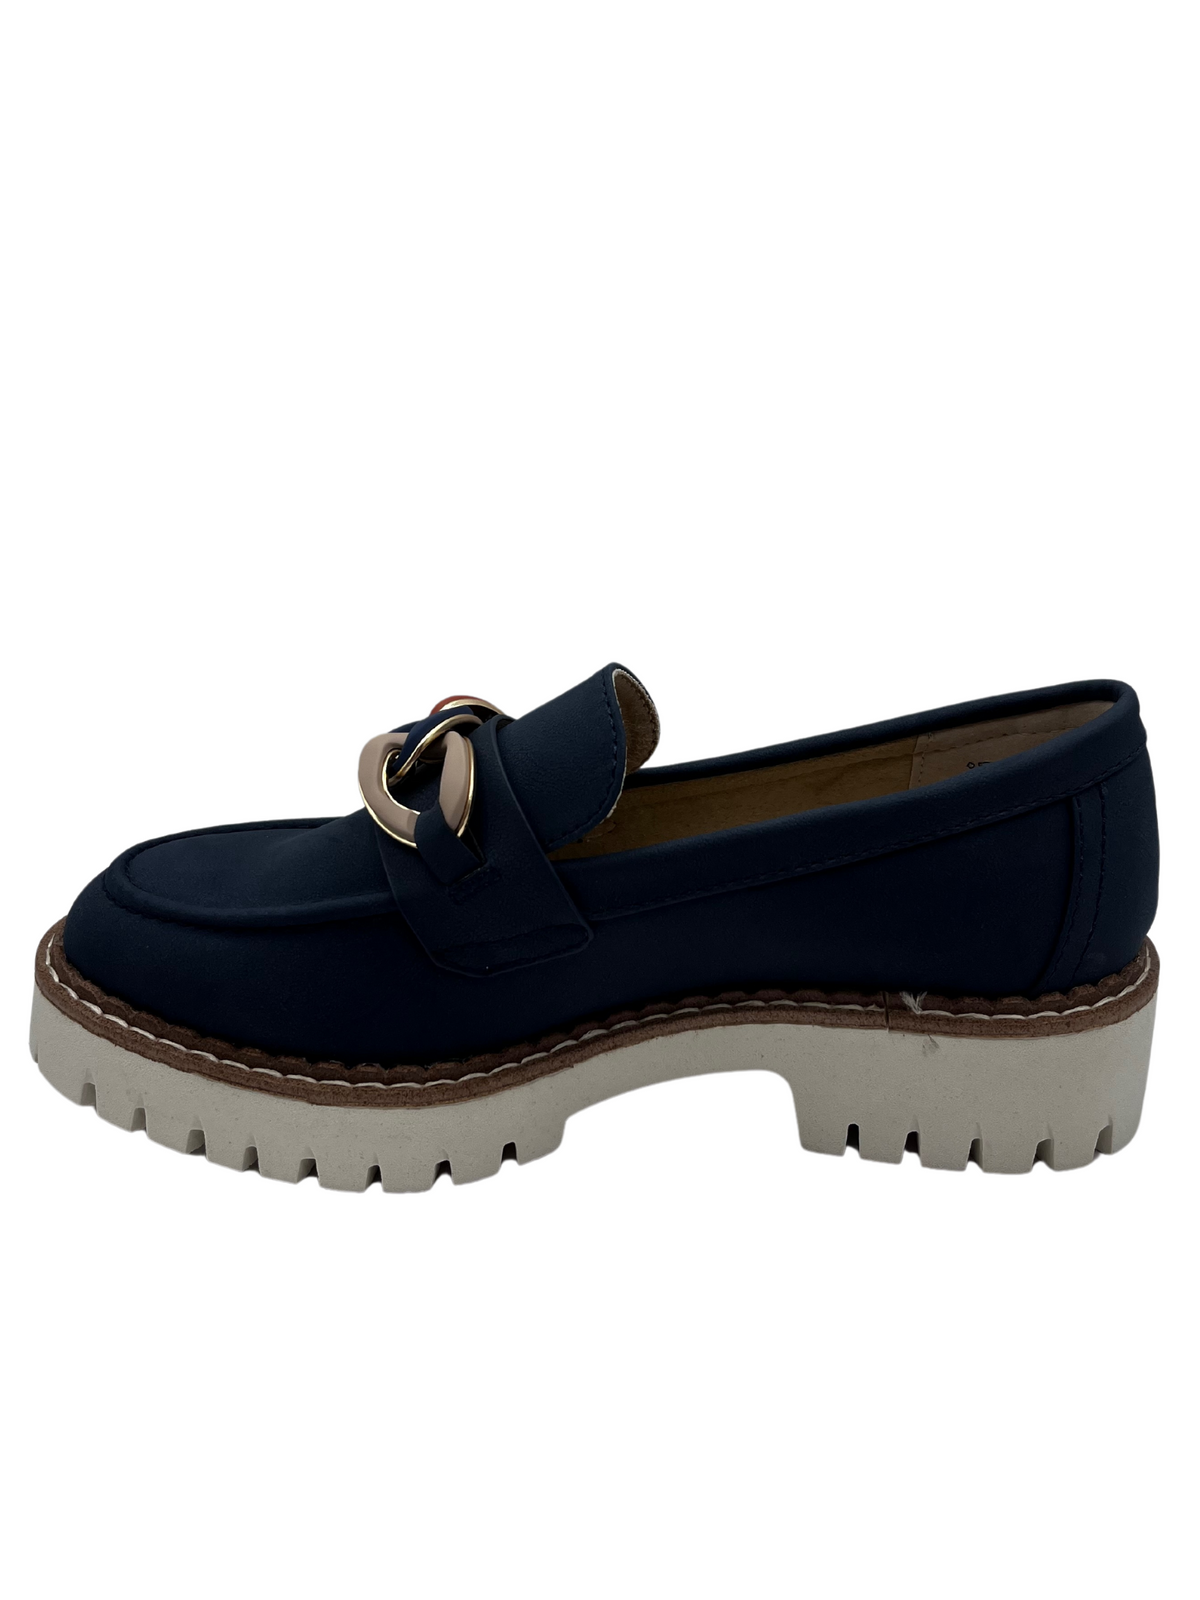 S Oliver Navy Loafer With Colourful Chain Design